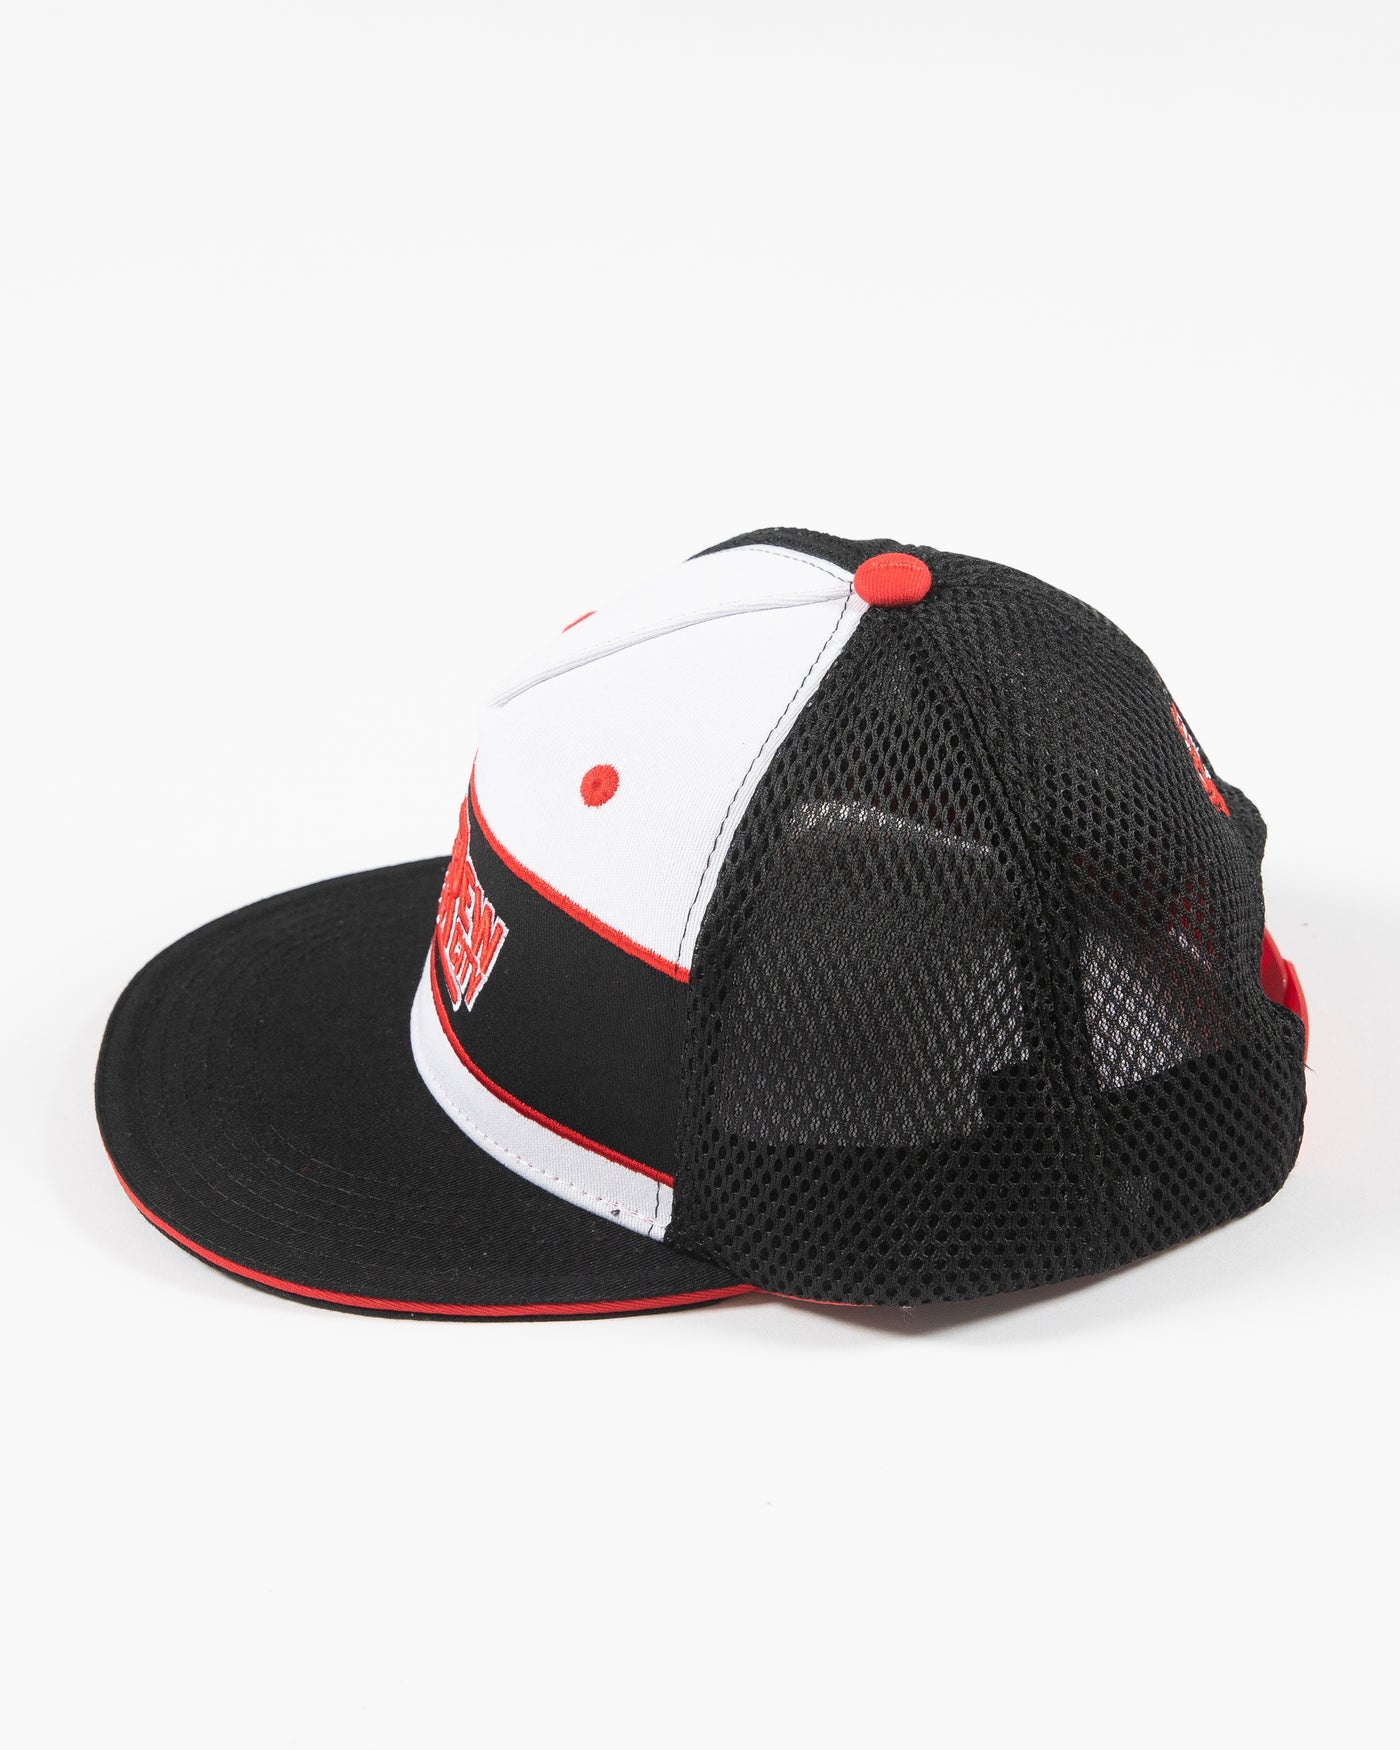 black, white and red adjustable cap with Screw City embroidered decal on front - left side lay flat